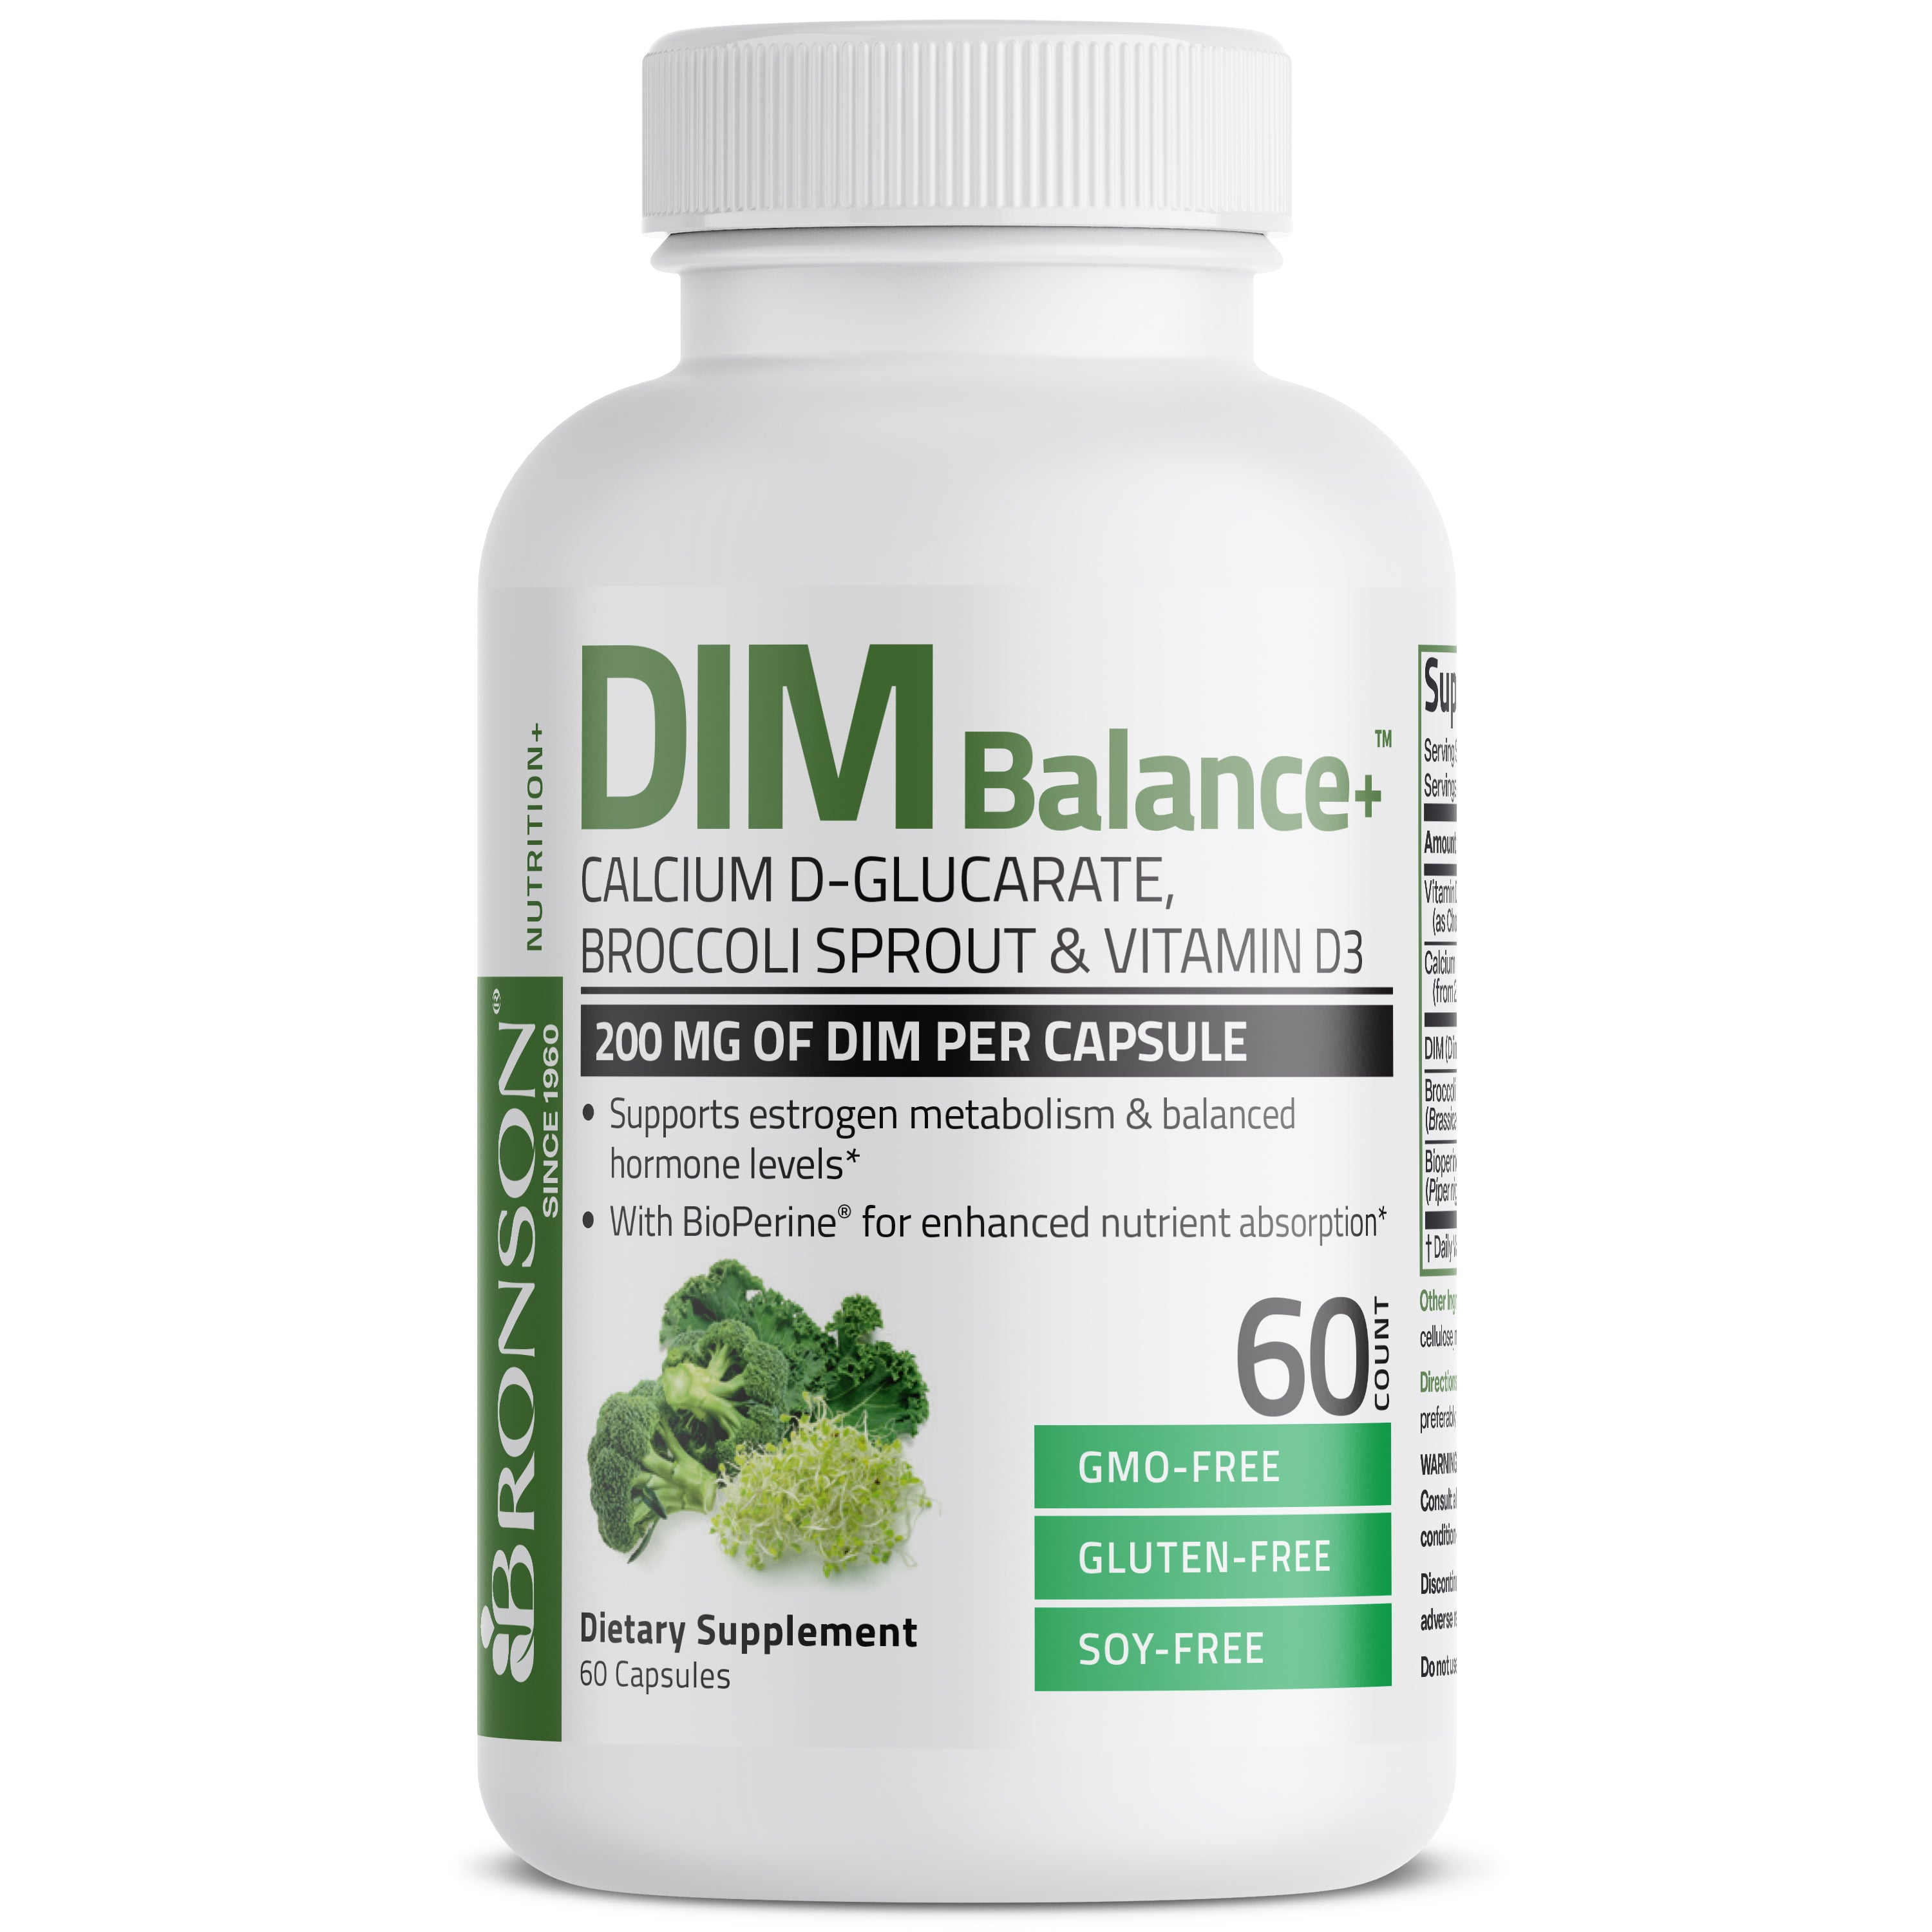 DIM Balance+ Calcium D-Glucarate, Broccoli Sprouts and Vitamin D3 200 MG